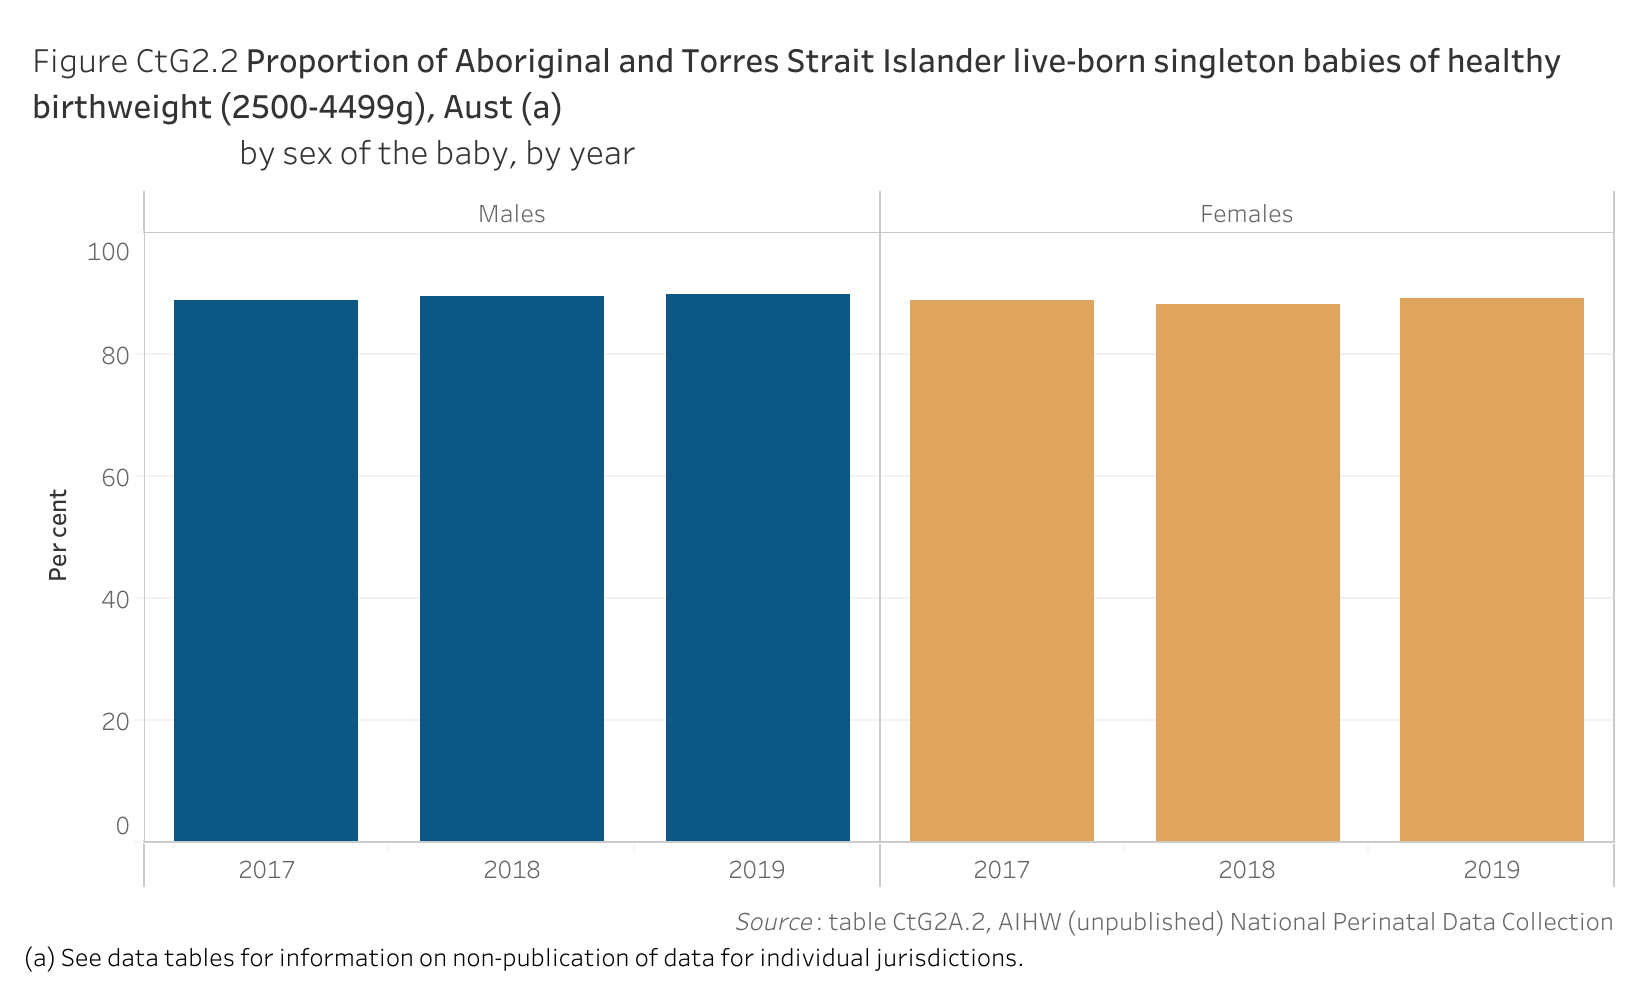 Figure CtG2.2. Bar chart showing the proportion of Aboriginal and Torres Strait Islander live-born singleton babies of healthy birthweight (2500-4499g) in Australia, by sex of the baby and by year. Data table of figure CtG2.2 is below.